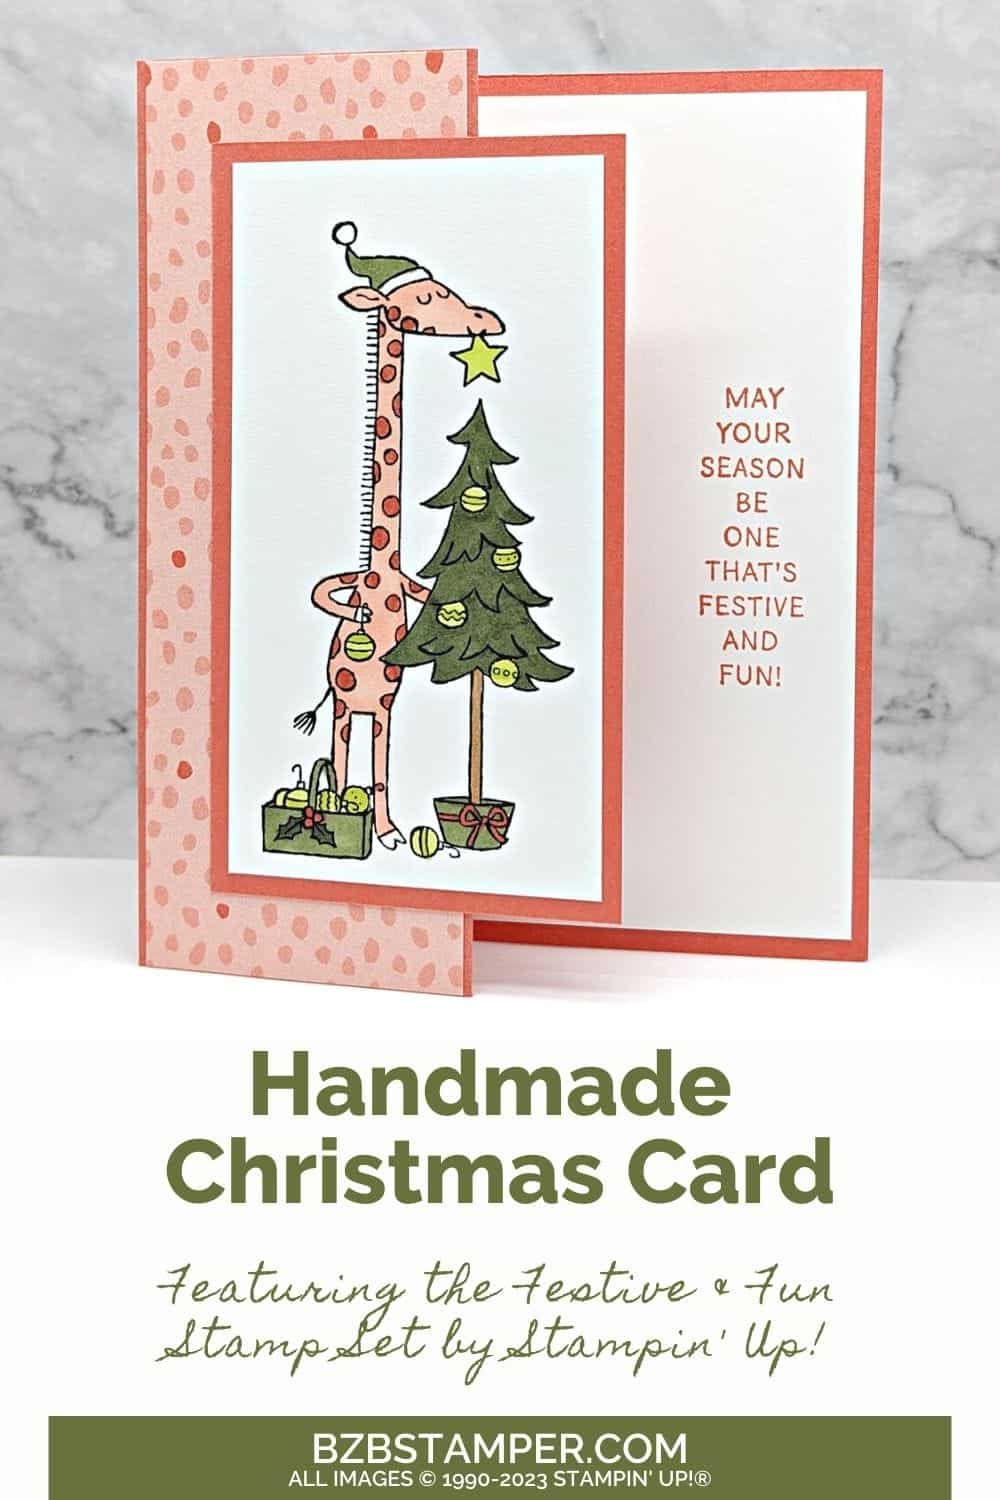 120123 stampin up festive and fun pin1